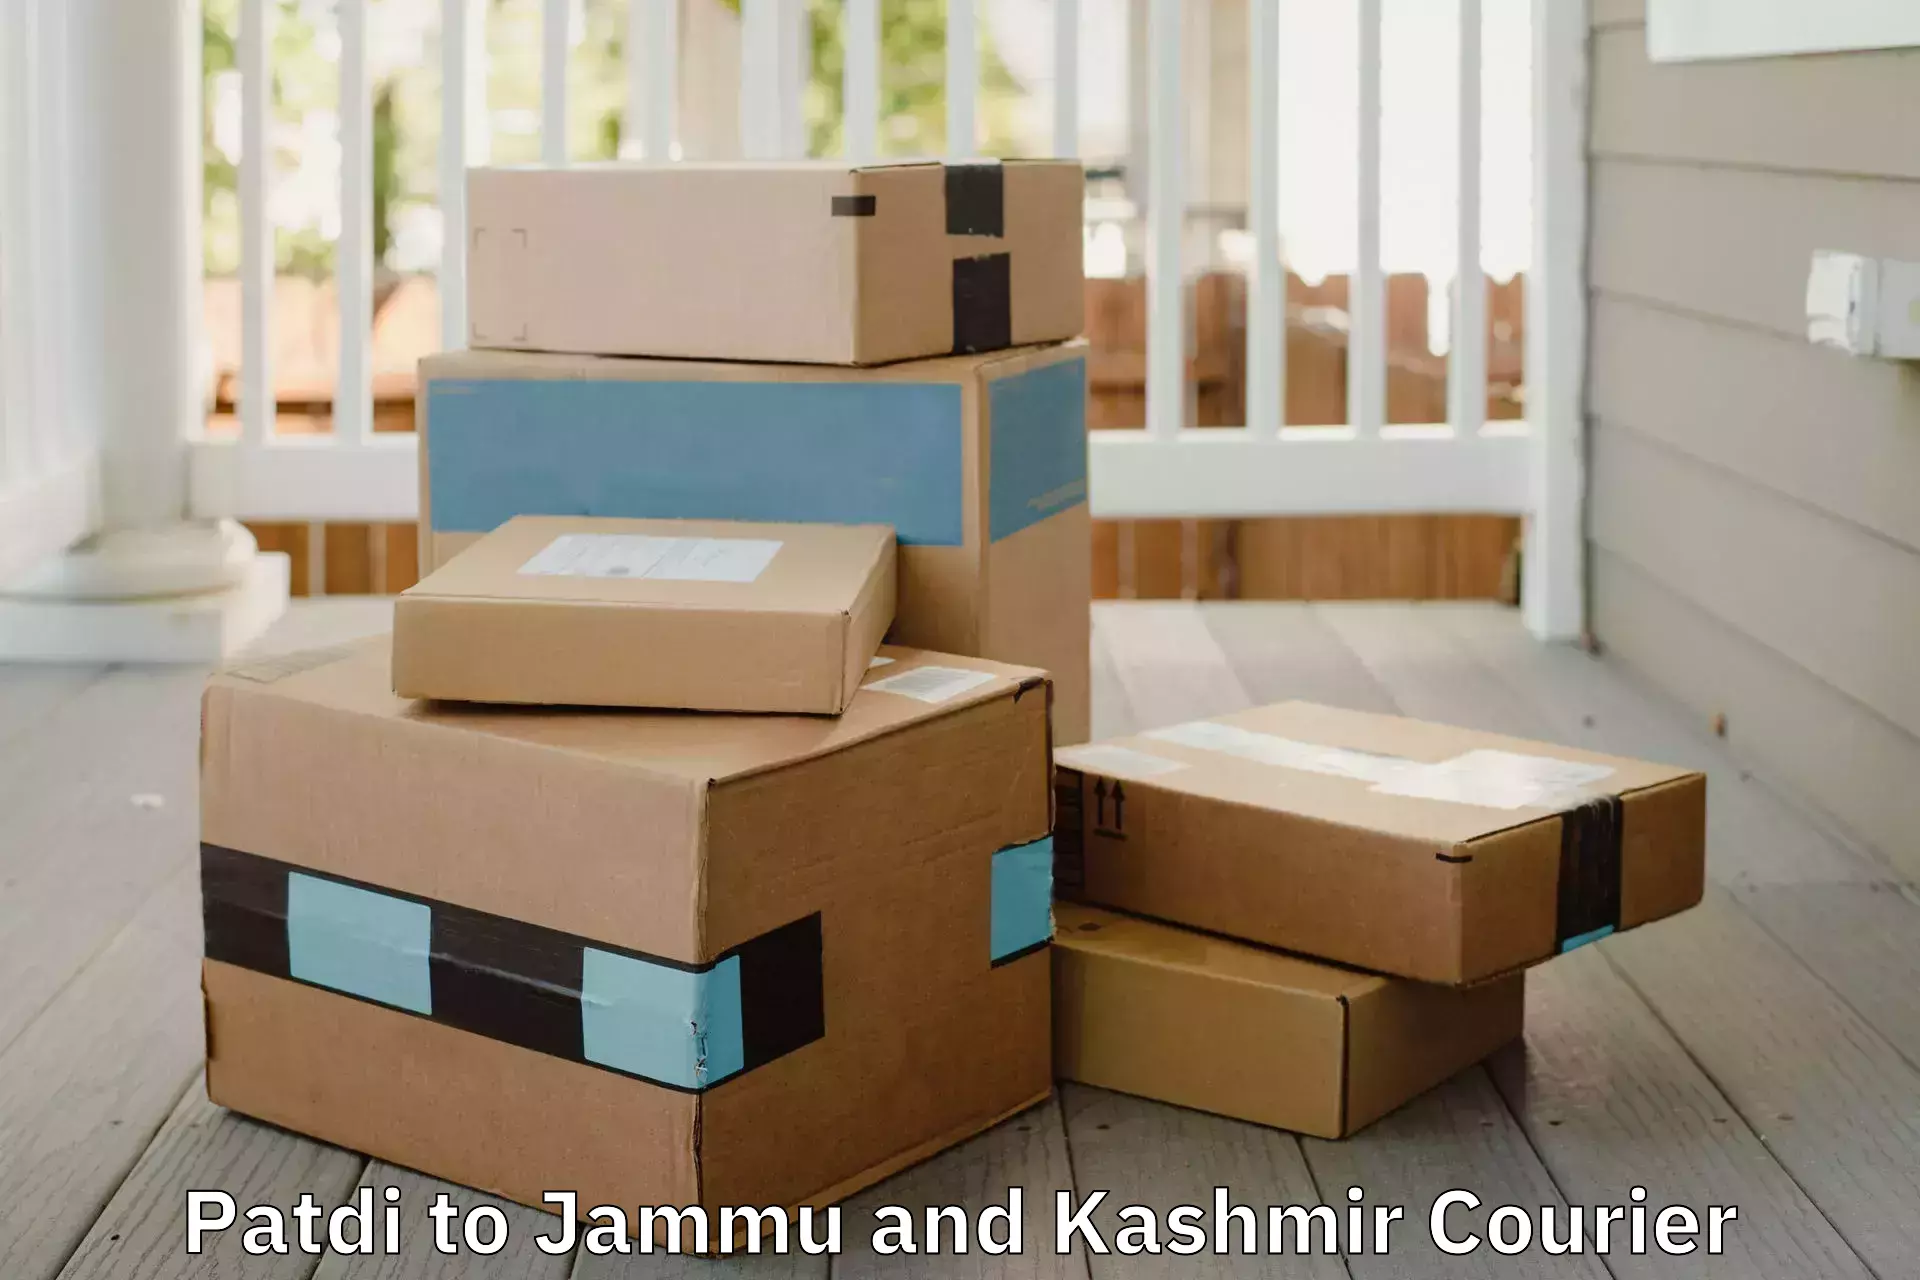 Efficient furniture relocation in Patdi to Jammu and Kashmir